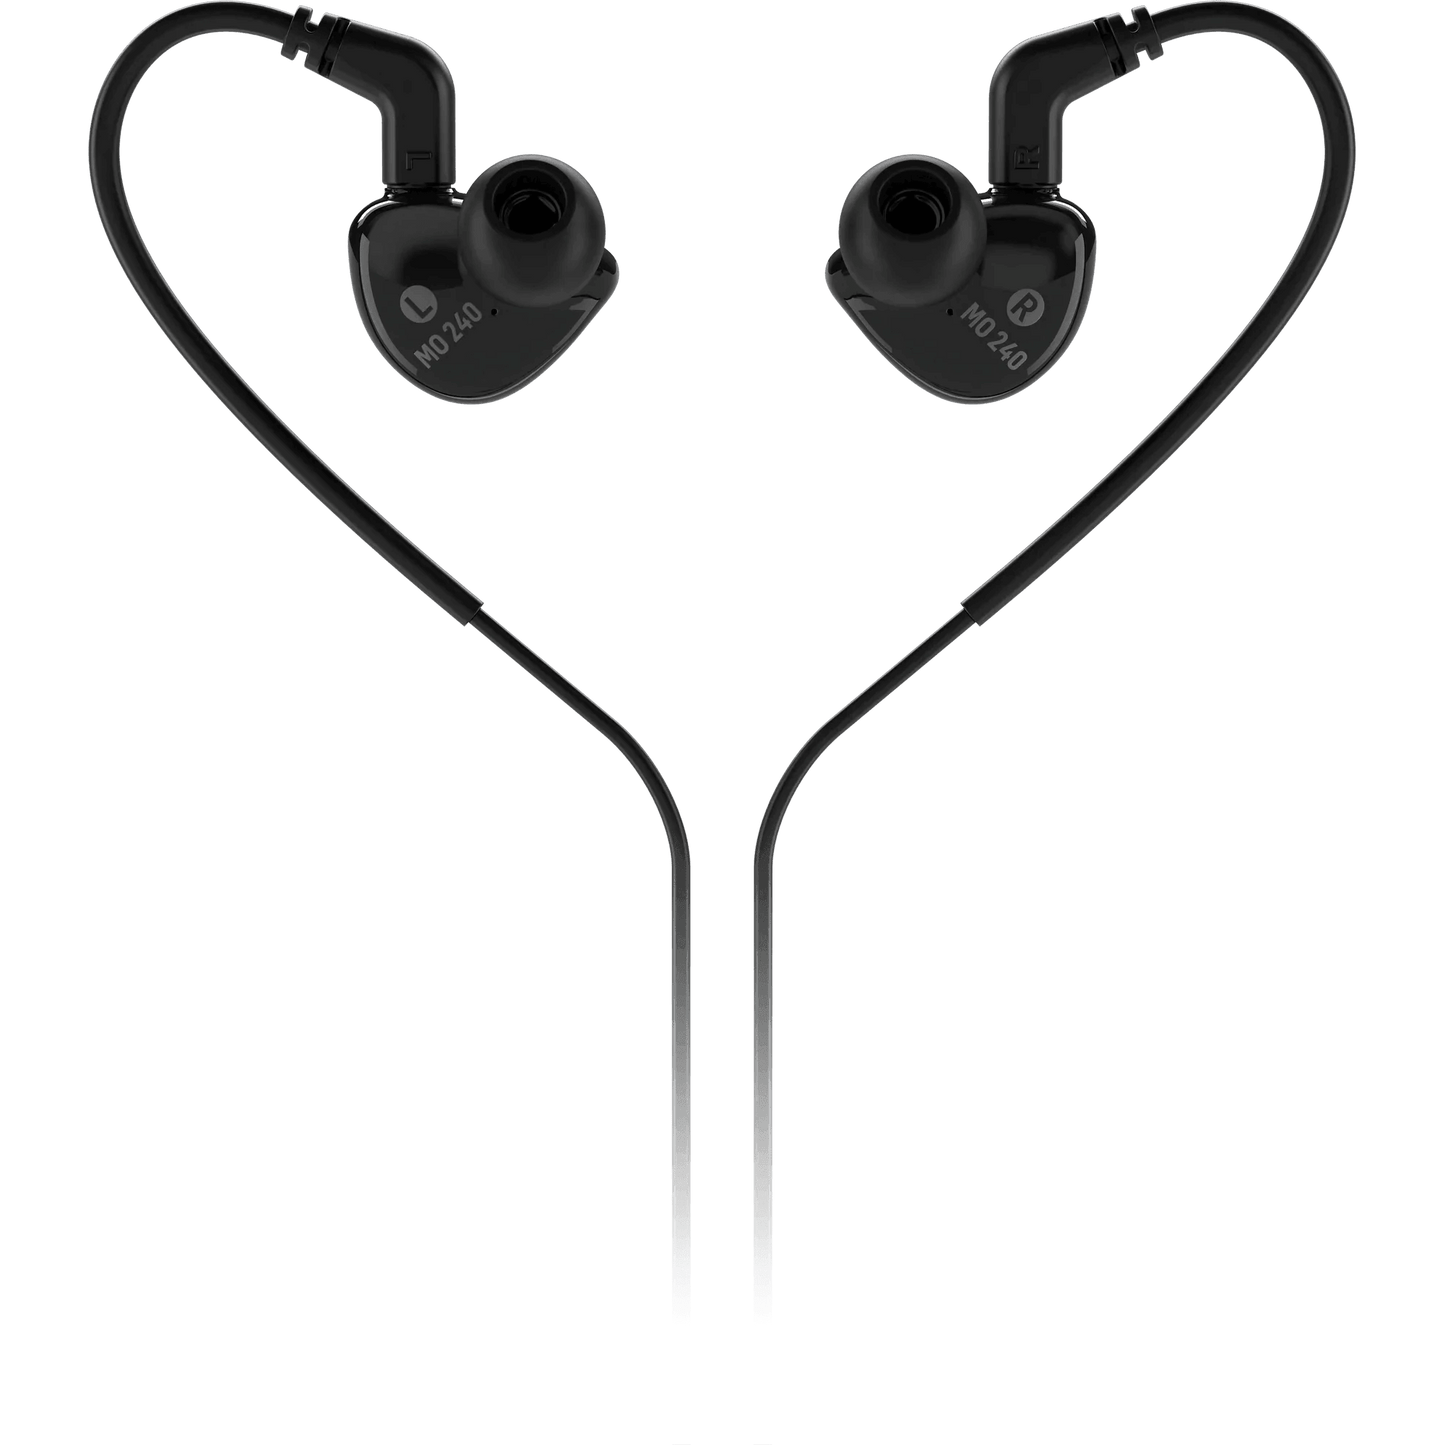 Behringer MO240 Studio Monitoring Earphones with Dual Hybrid Drivers